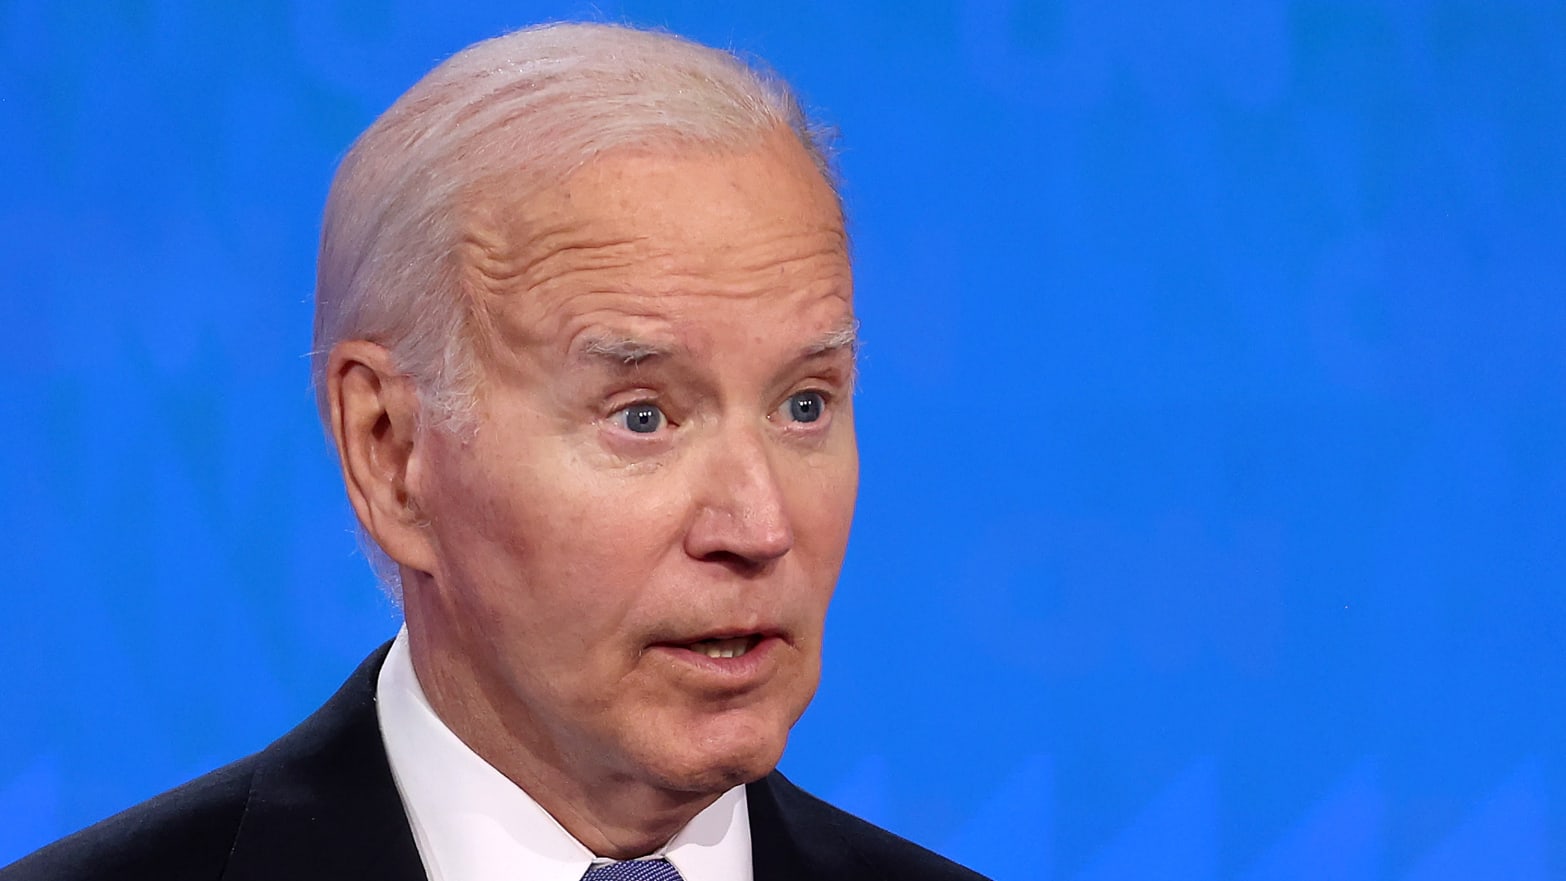 New York Times columnists urged Joe Biden to quit the 2024 presidential election after his debate with Donald Trump.